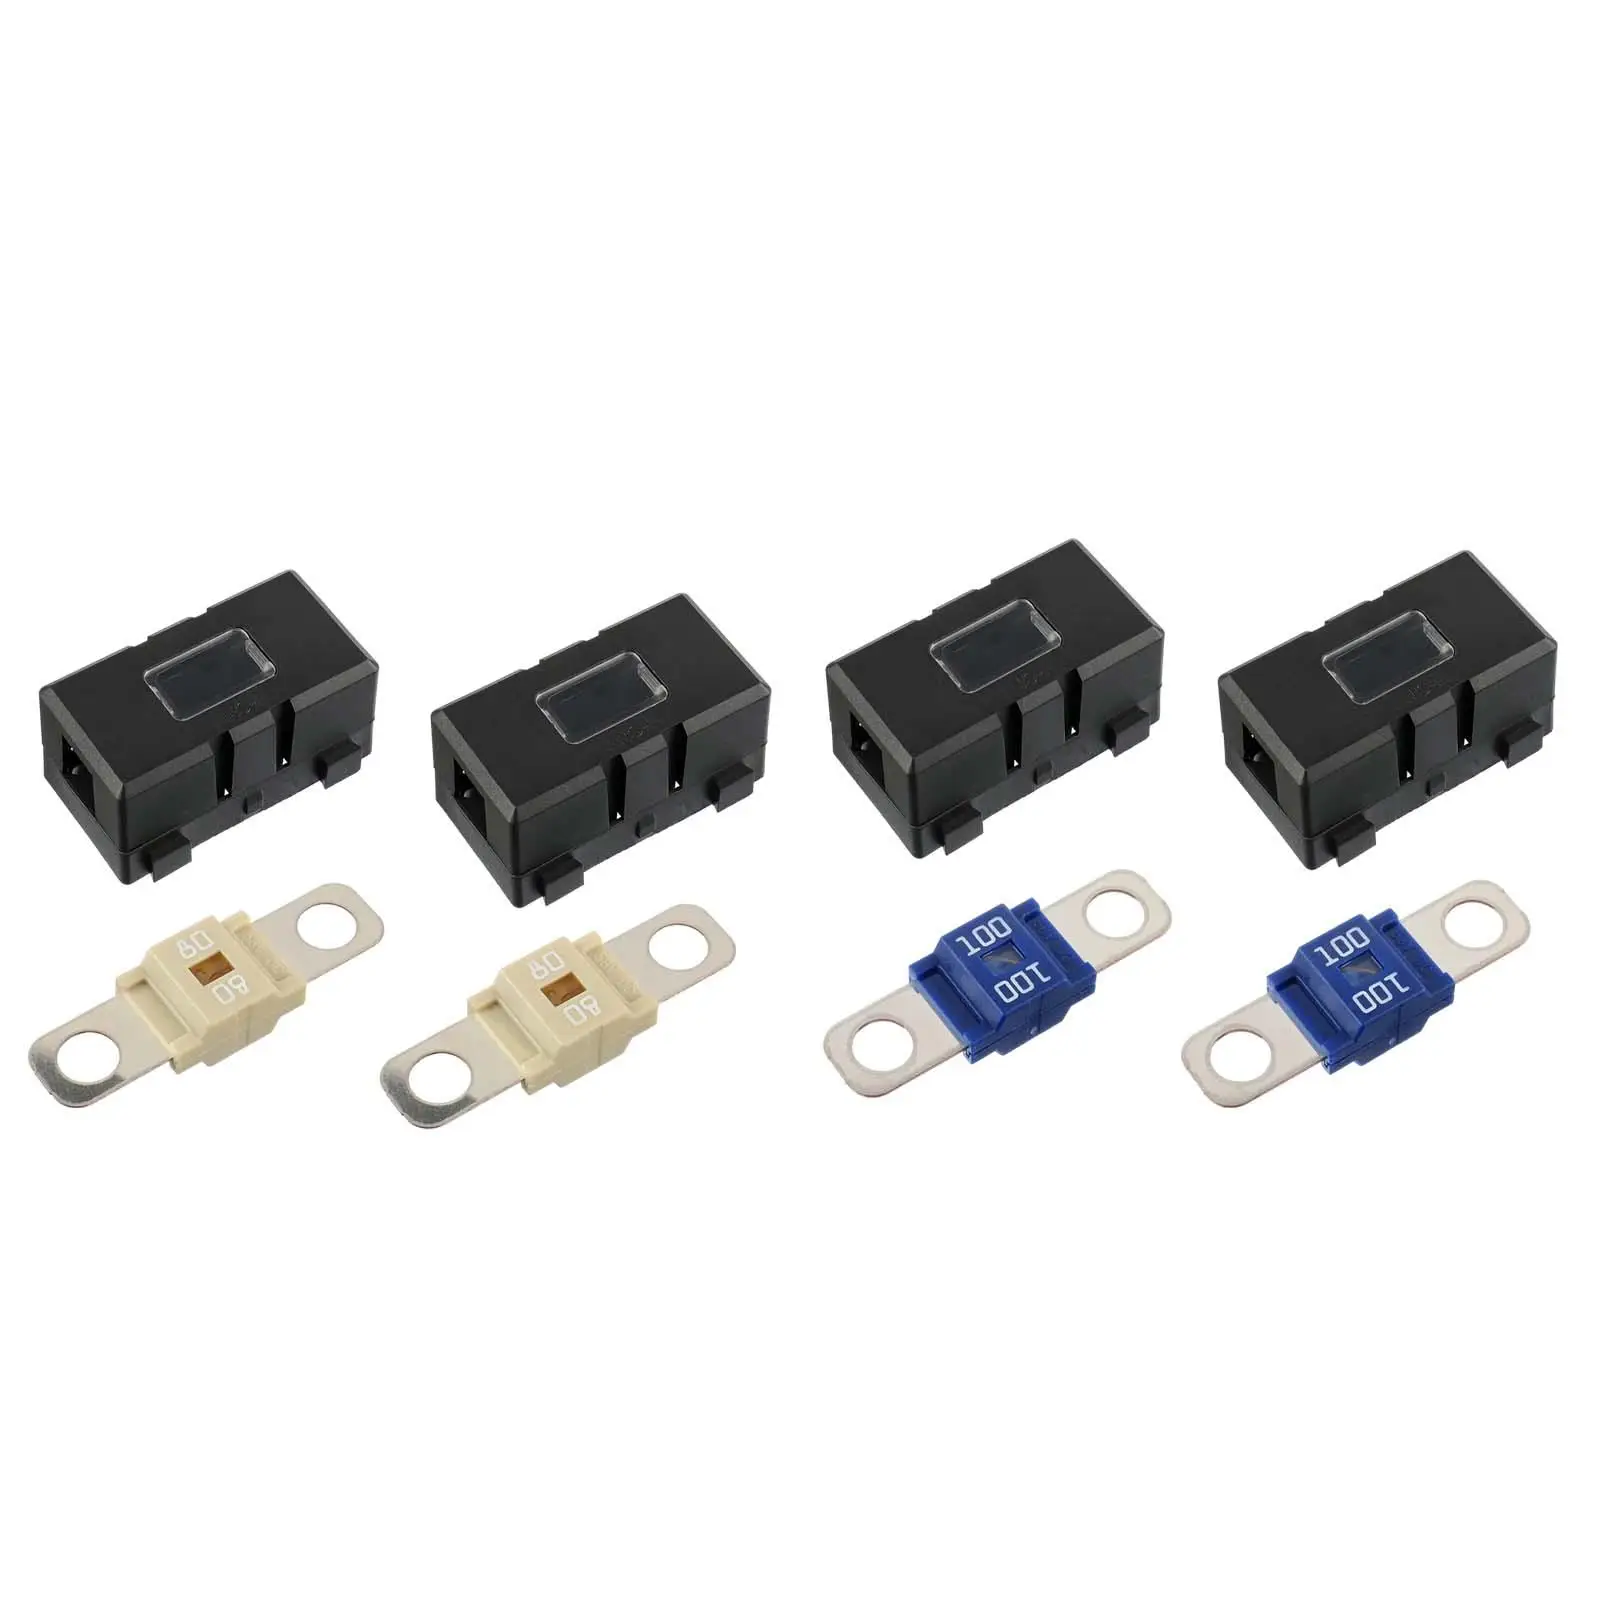 Multipurpose Car Fuse Holder with 2Pcs Fuses Waterproof ans Durable Fuse block for Trucks Cars Vehicles